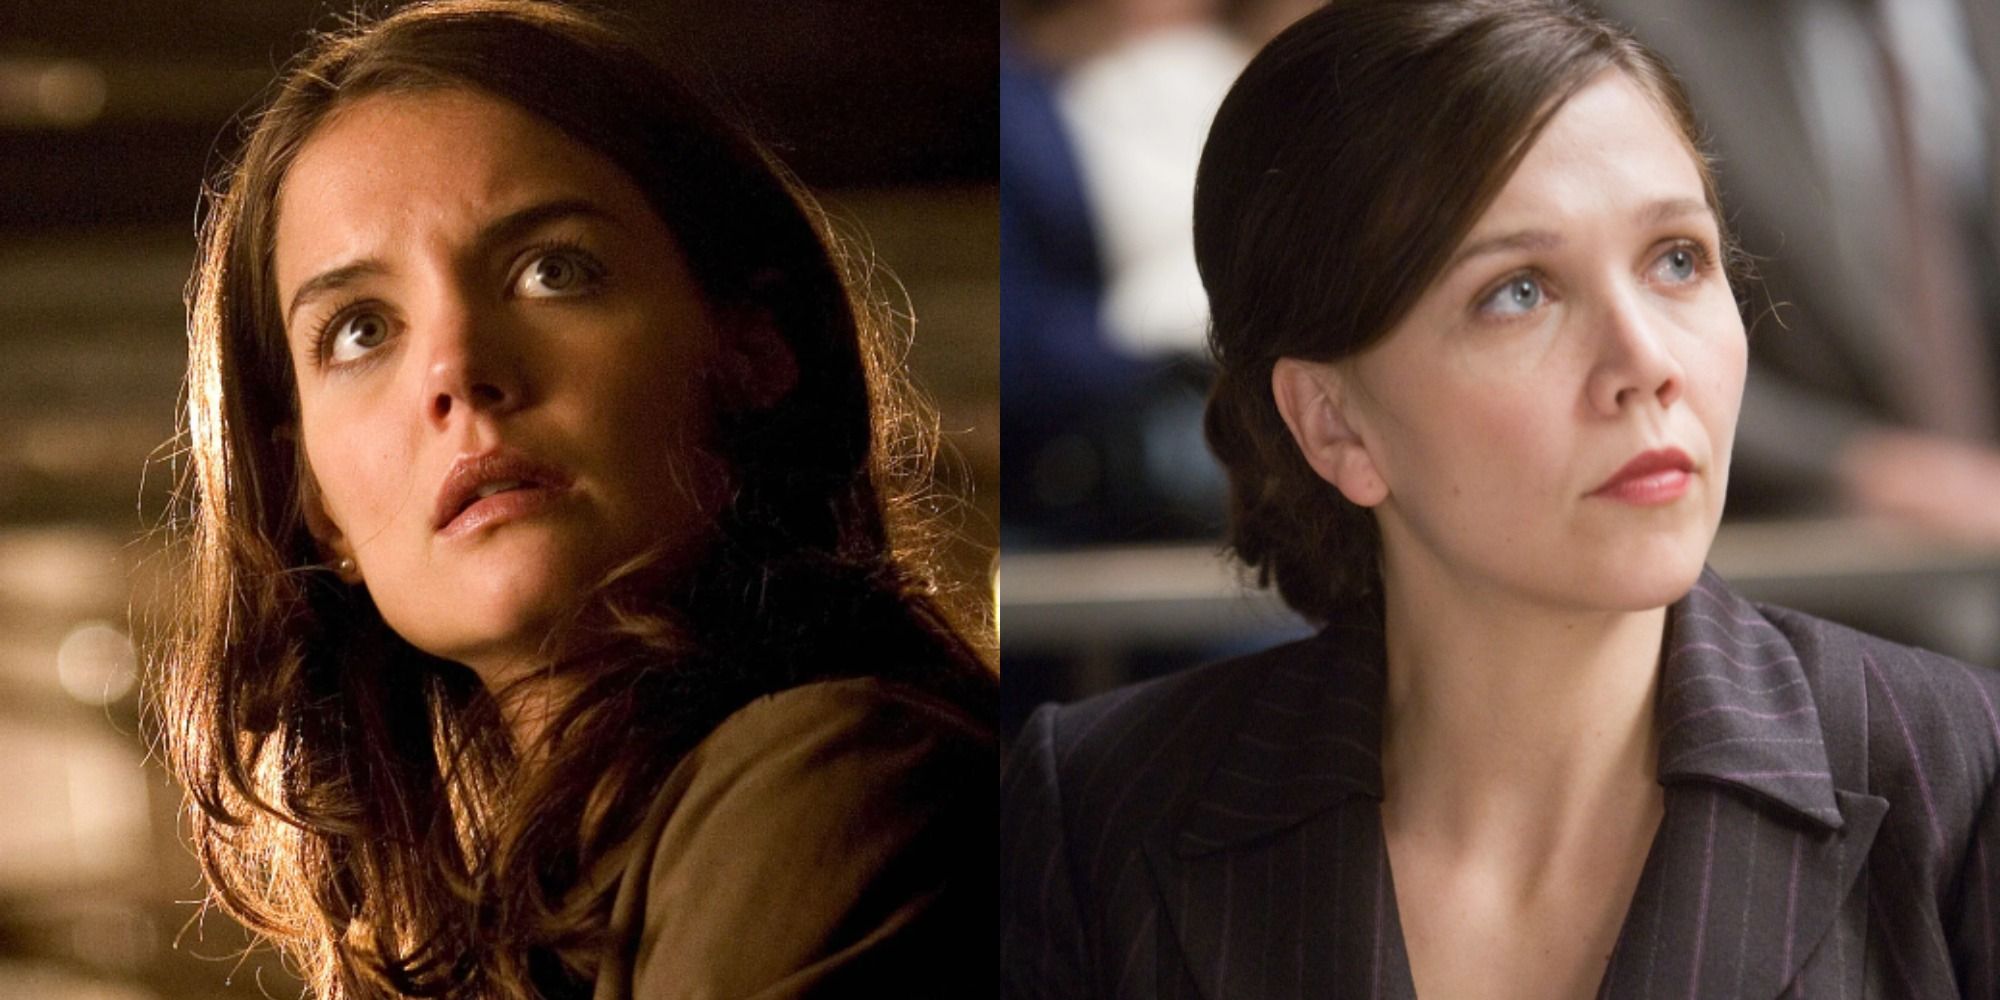 side by side images of Katie Holmes in Batman Begins and Maria Bello in The Dark Knight as Rachel